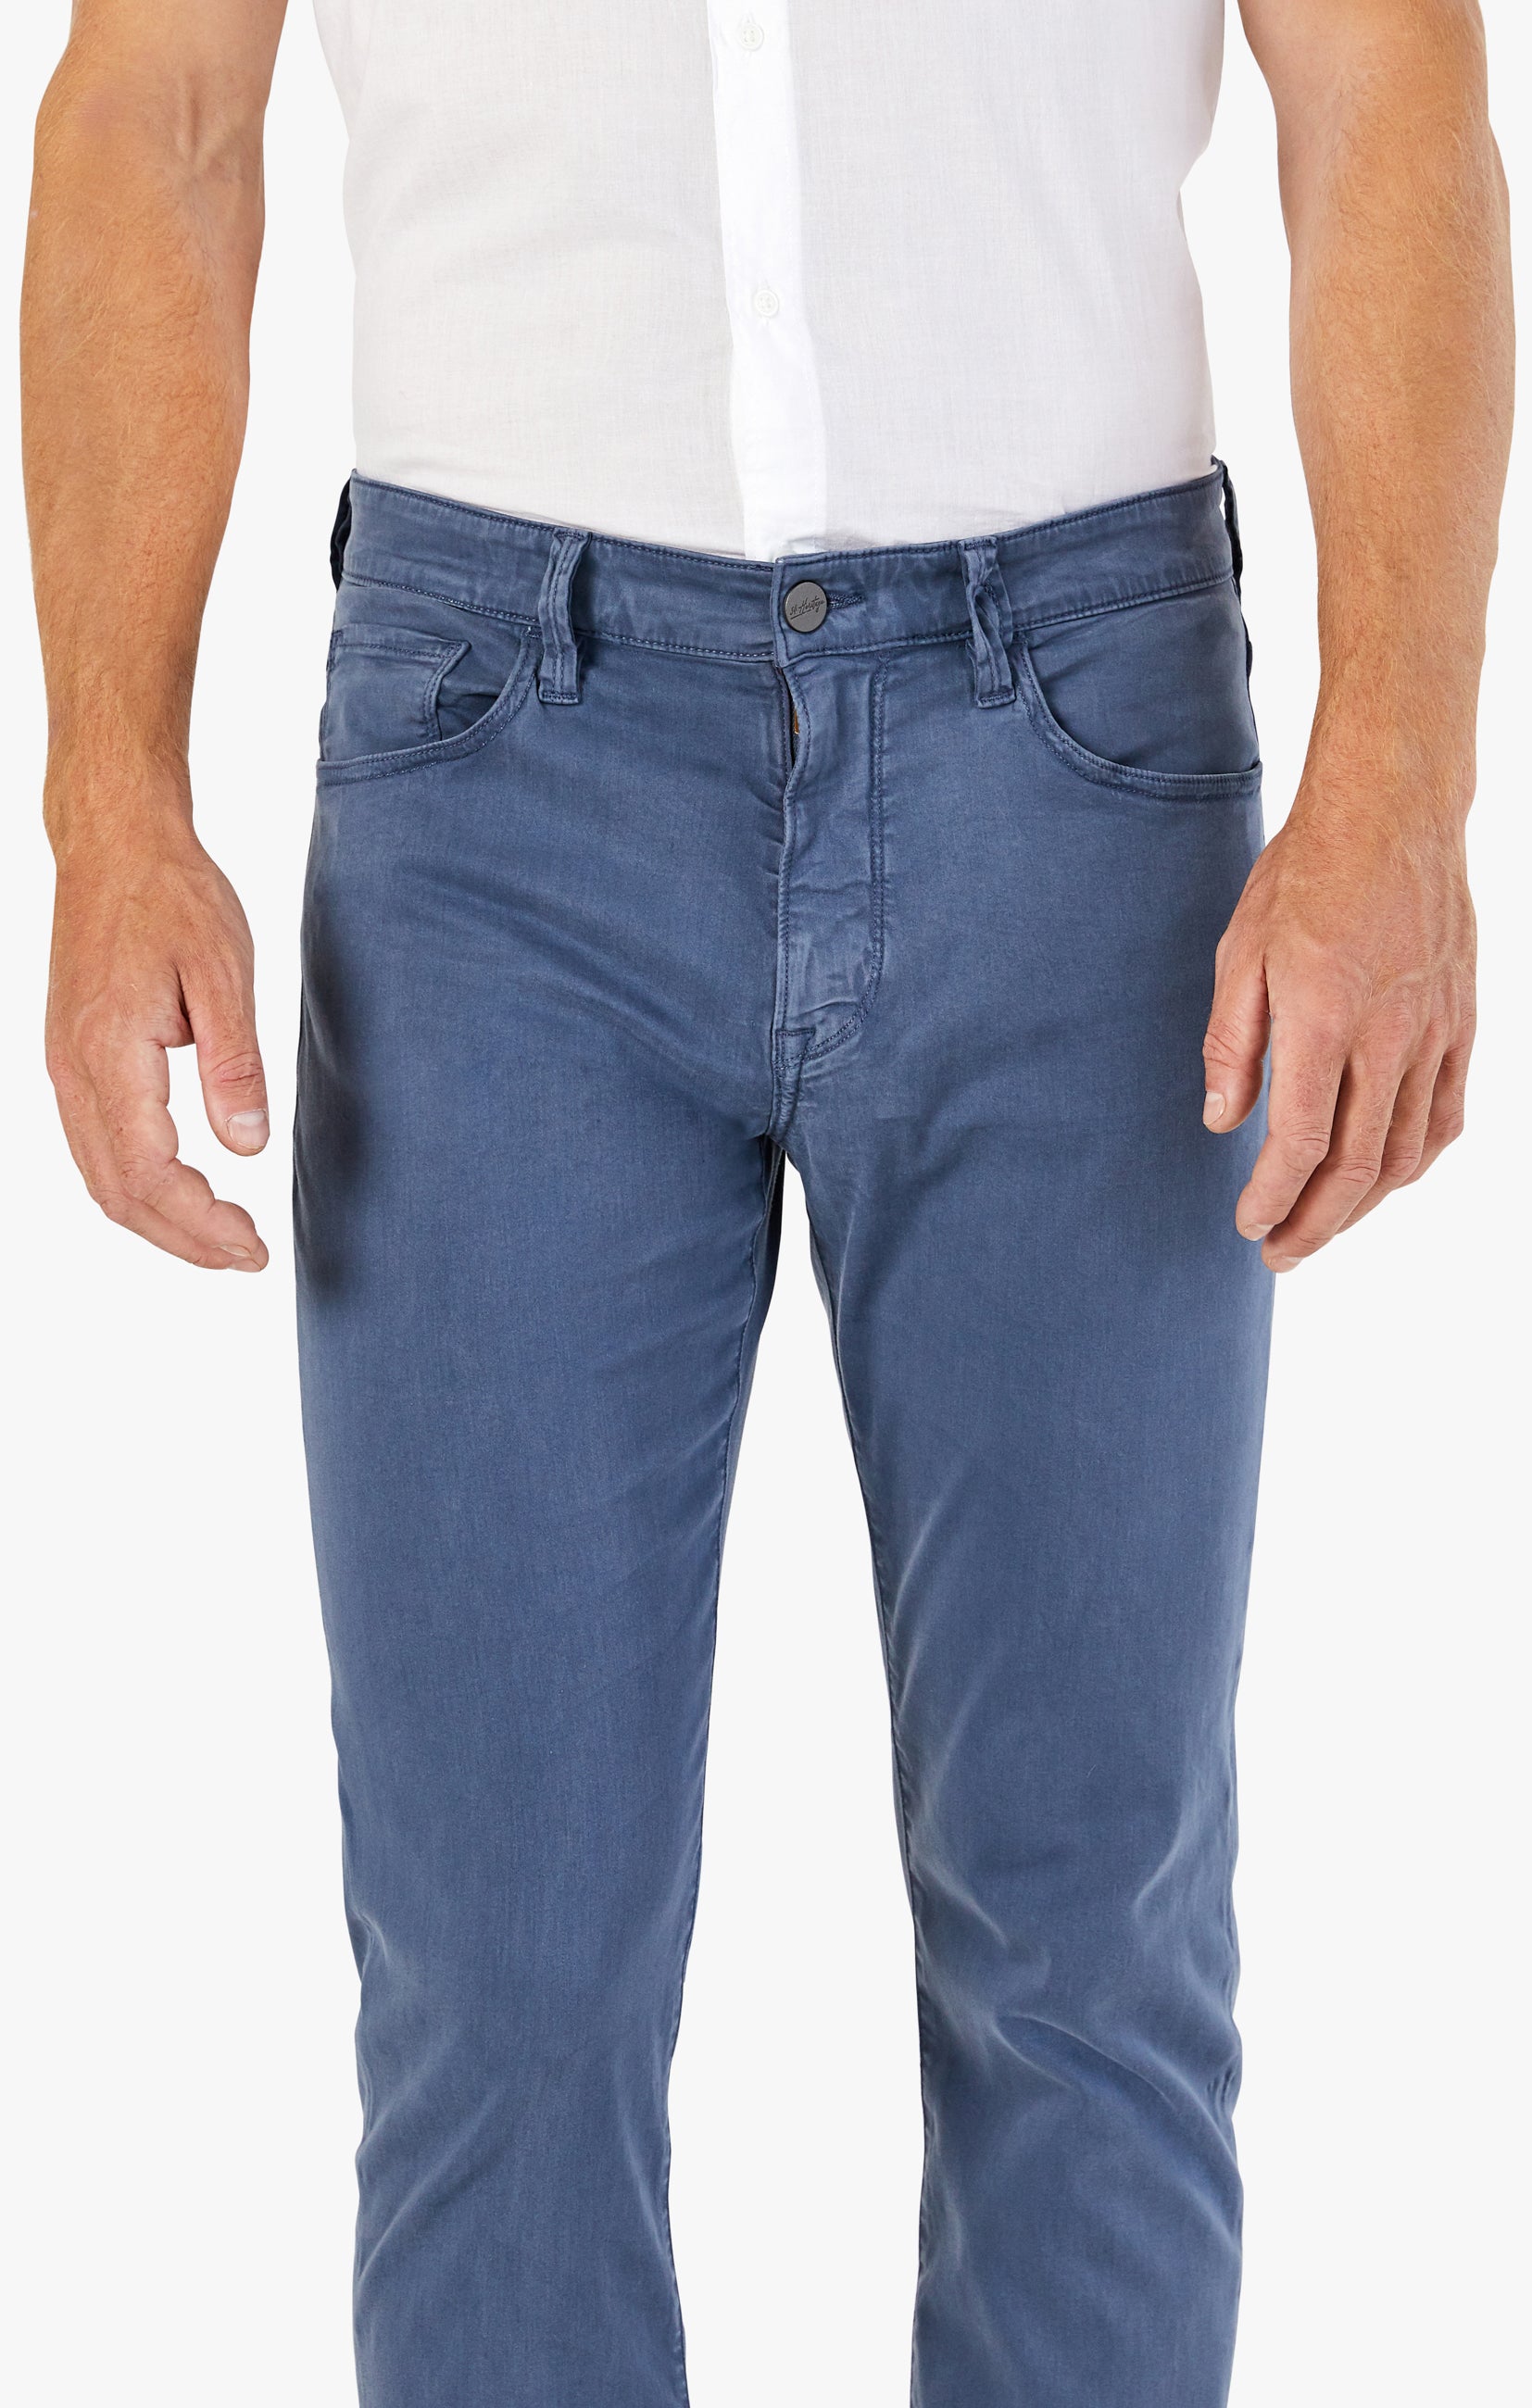 Charisma Relaxed Straight Pants In Vintage Indigo Twill Image 4